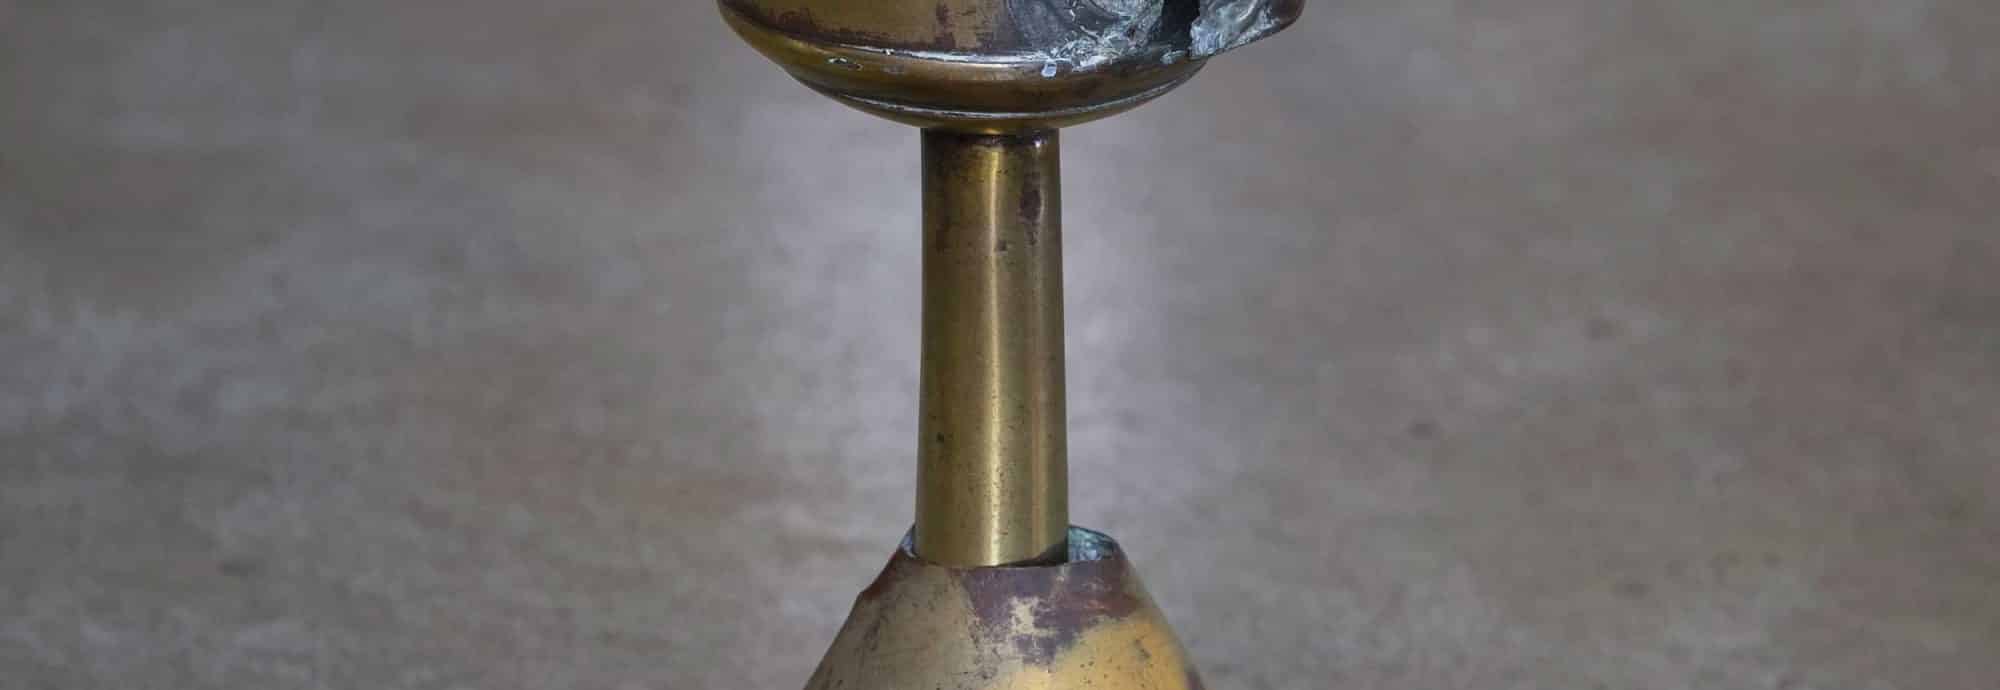 Photo of a pilchard oil lamp.